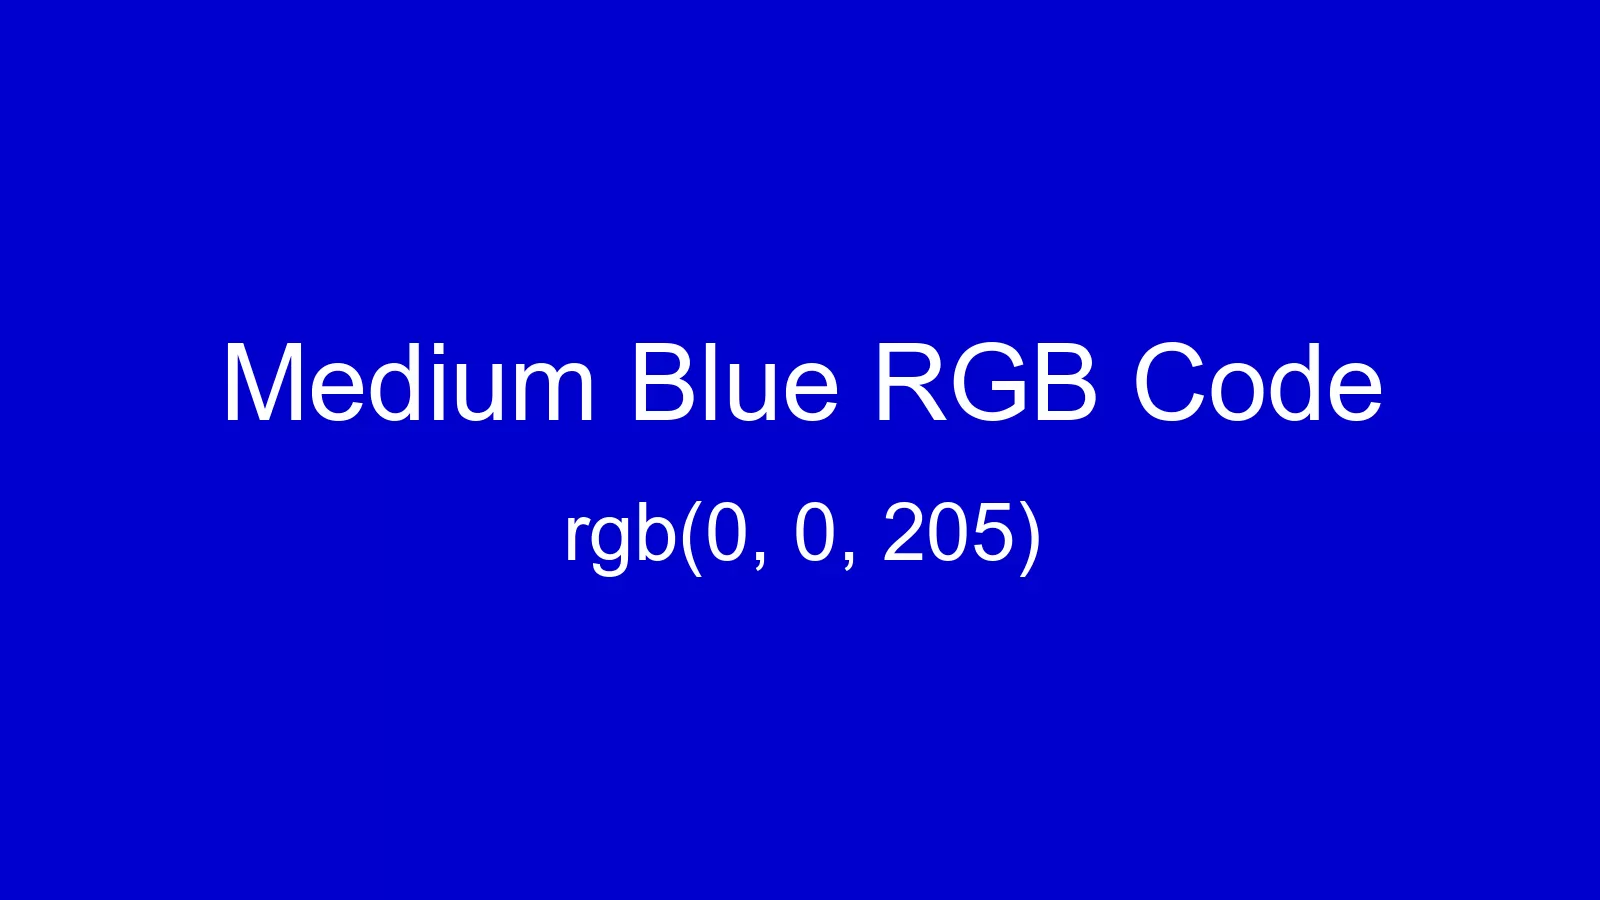 preview image of Medium Blue color and RGB code